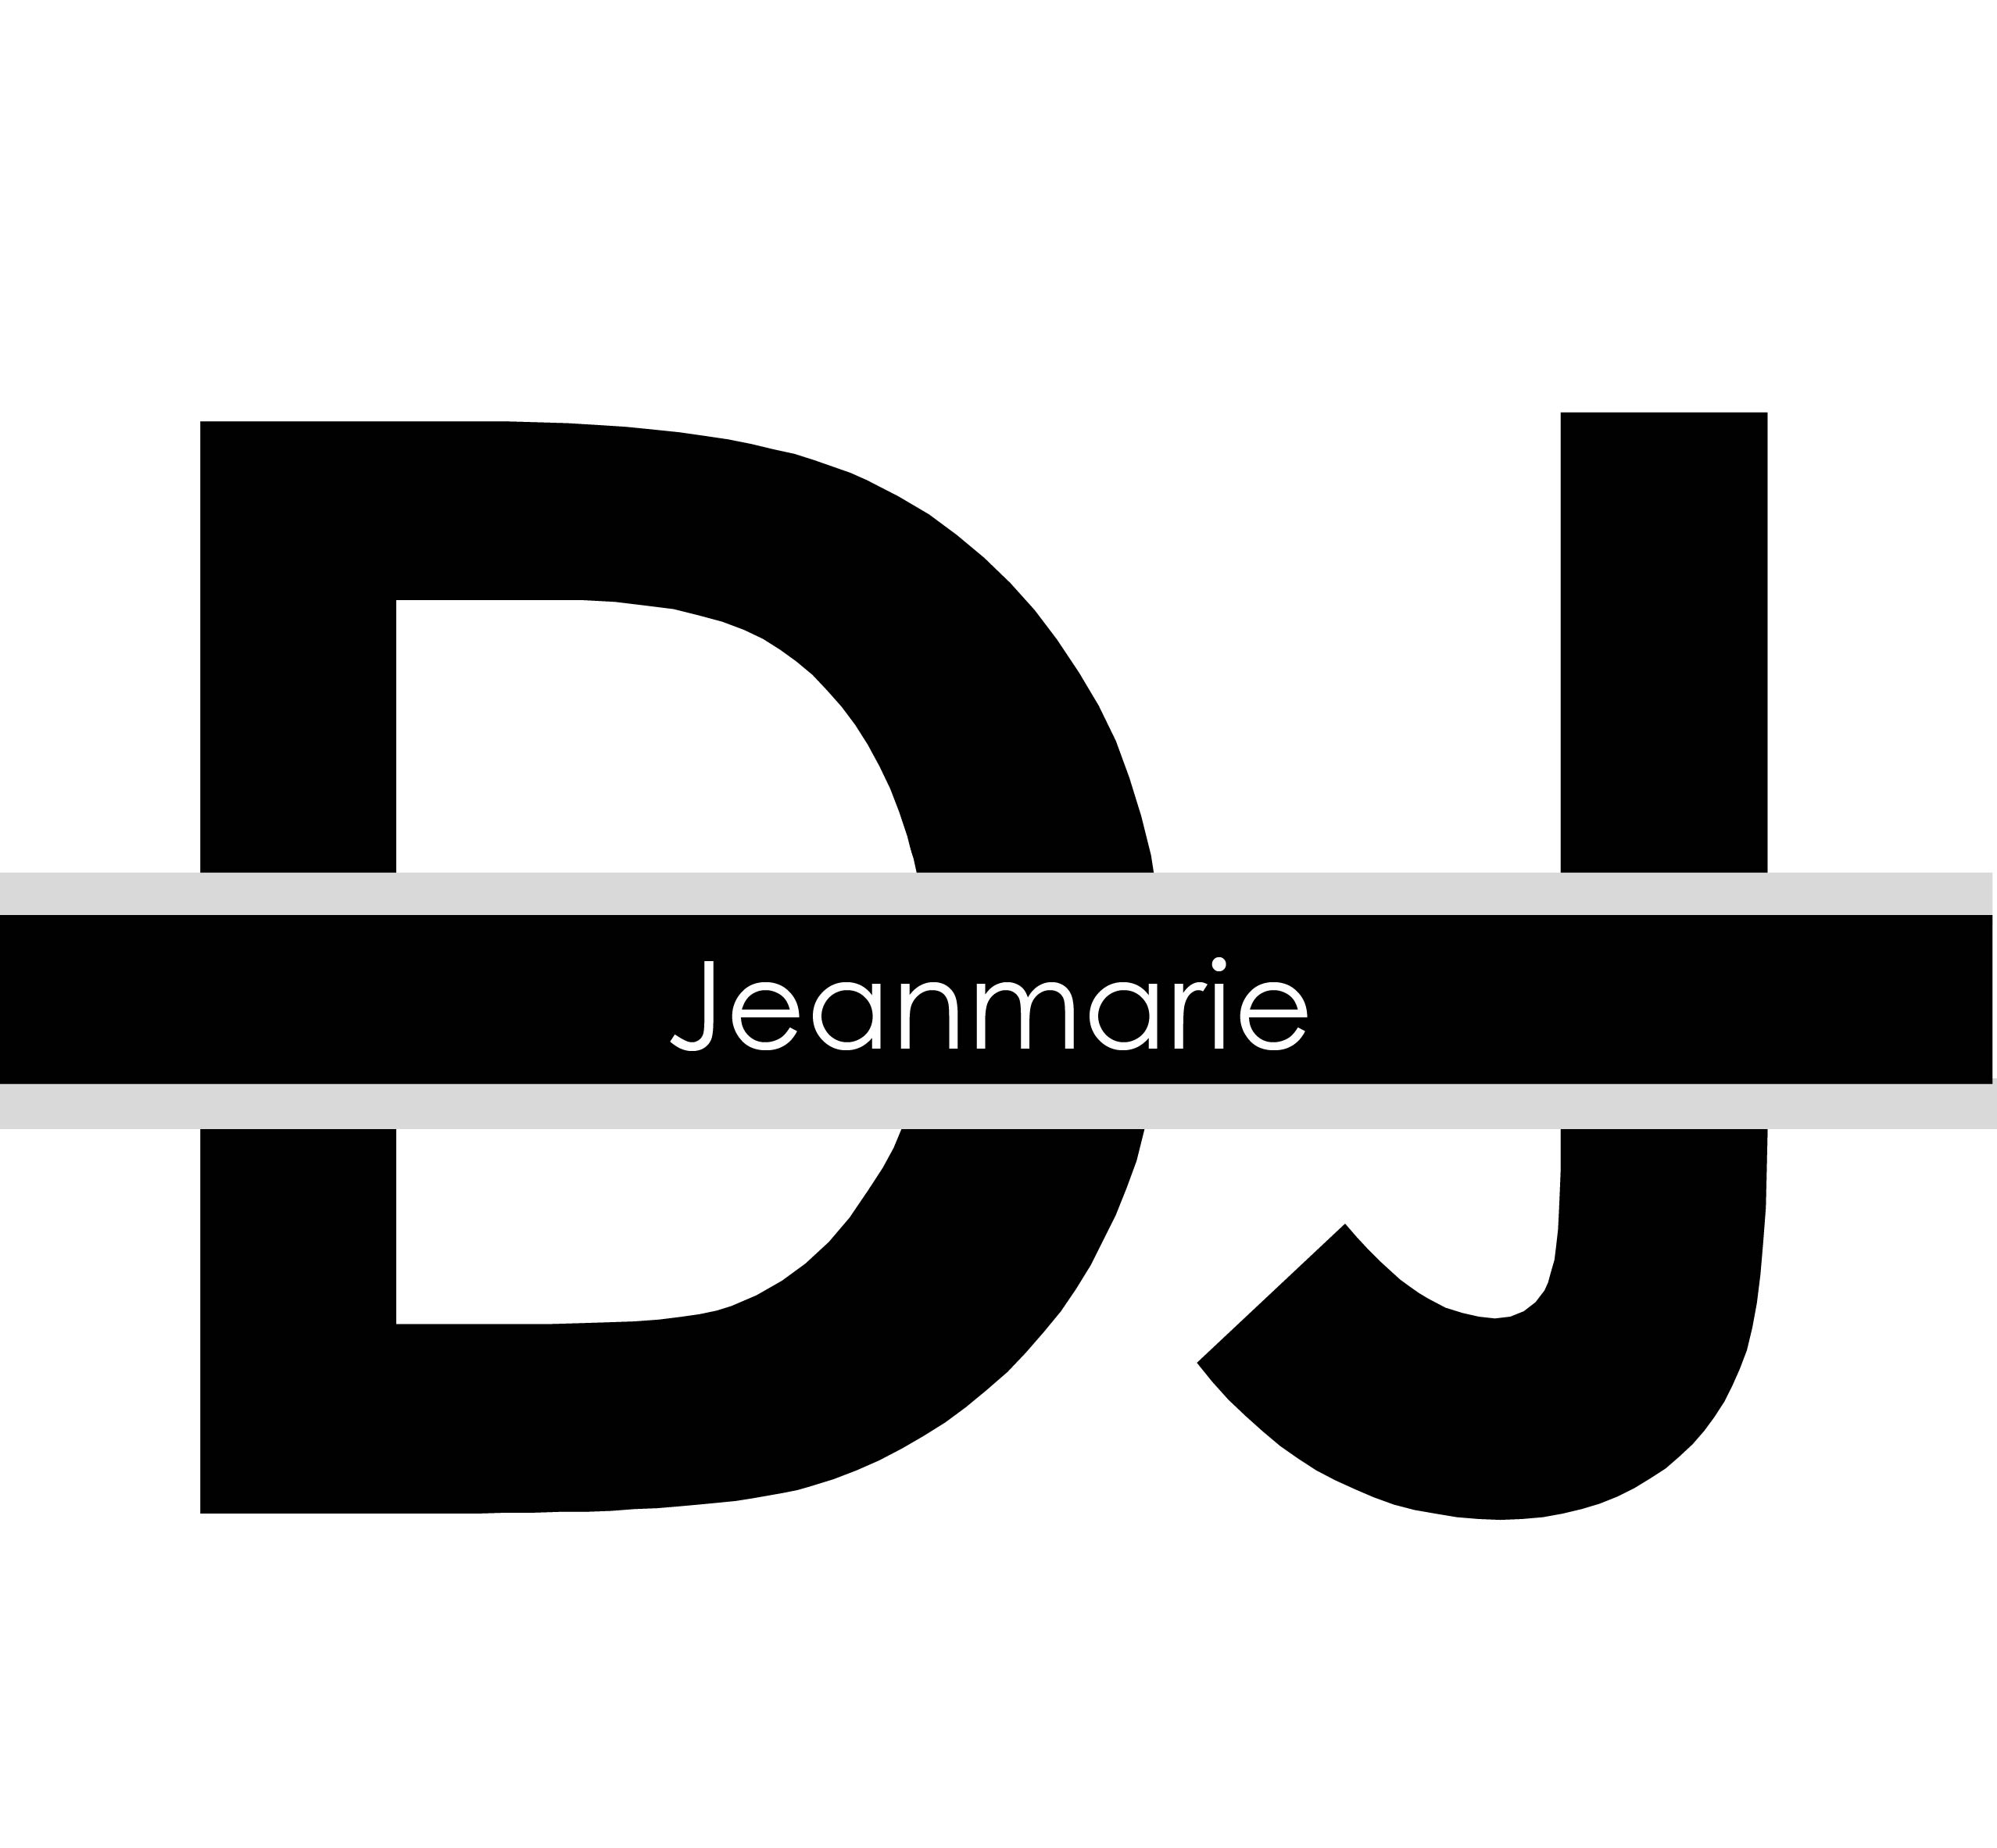 dj jeanmarie entertainment with sophistication logo